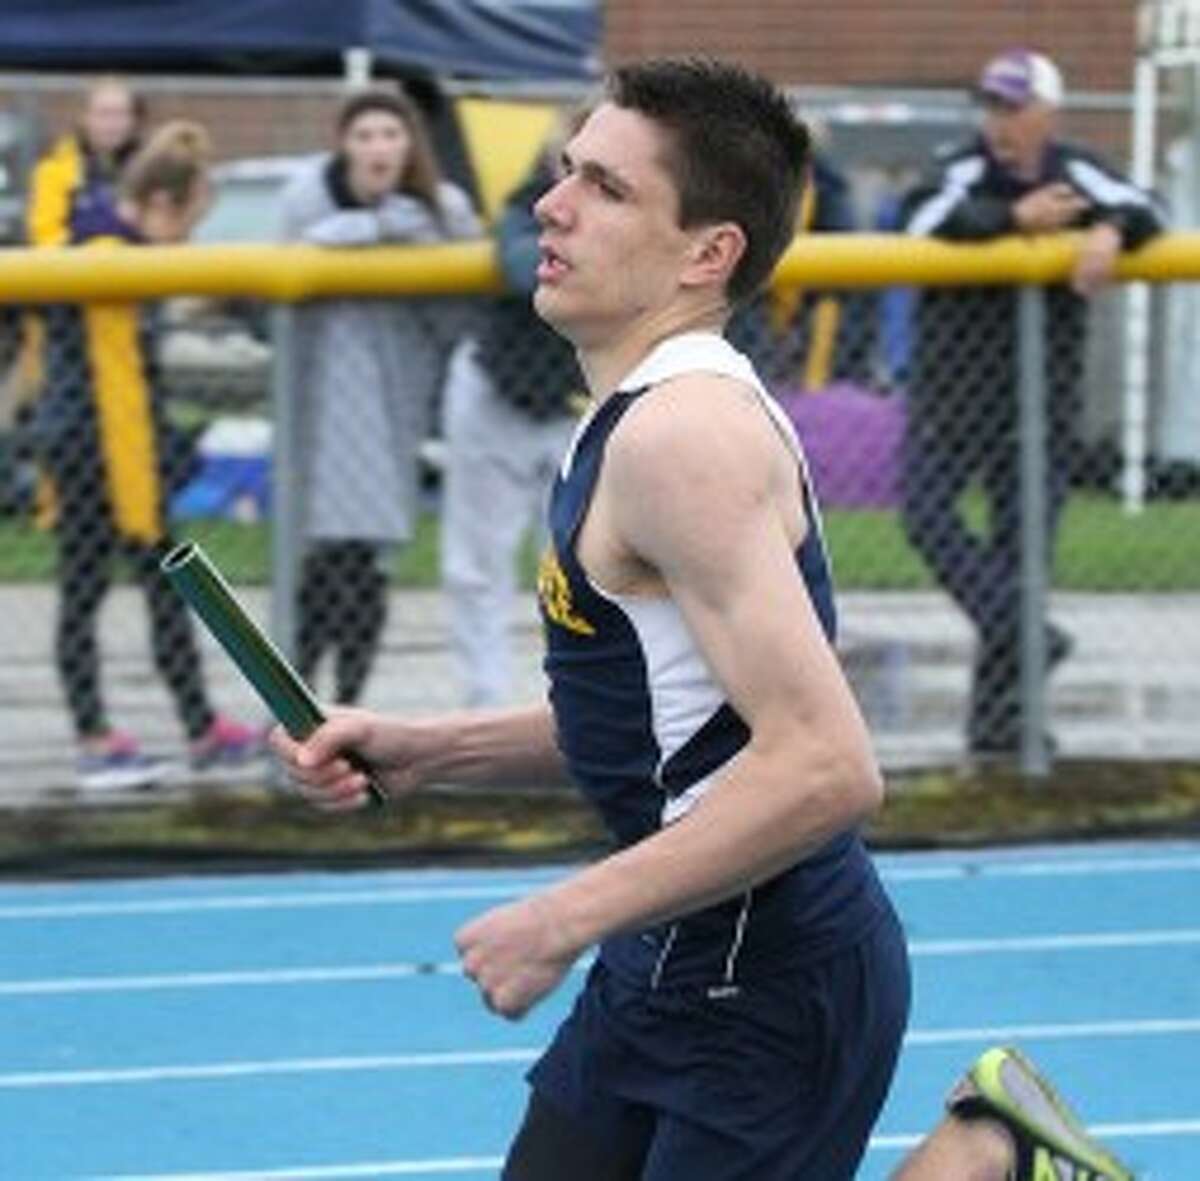 Manistee’s Carter Eckhardt will run in the 3,200 relay with Jarret Deisch, Andrew Solberg and Bryce Cameron on Saturday. (Matt Wenzel/News Advocate file photo)